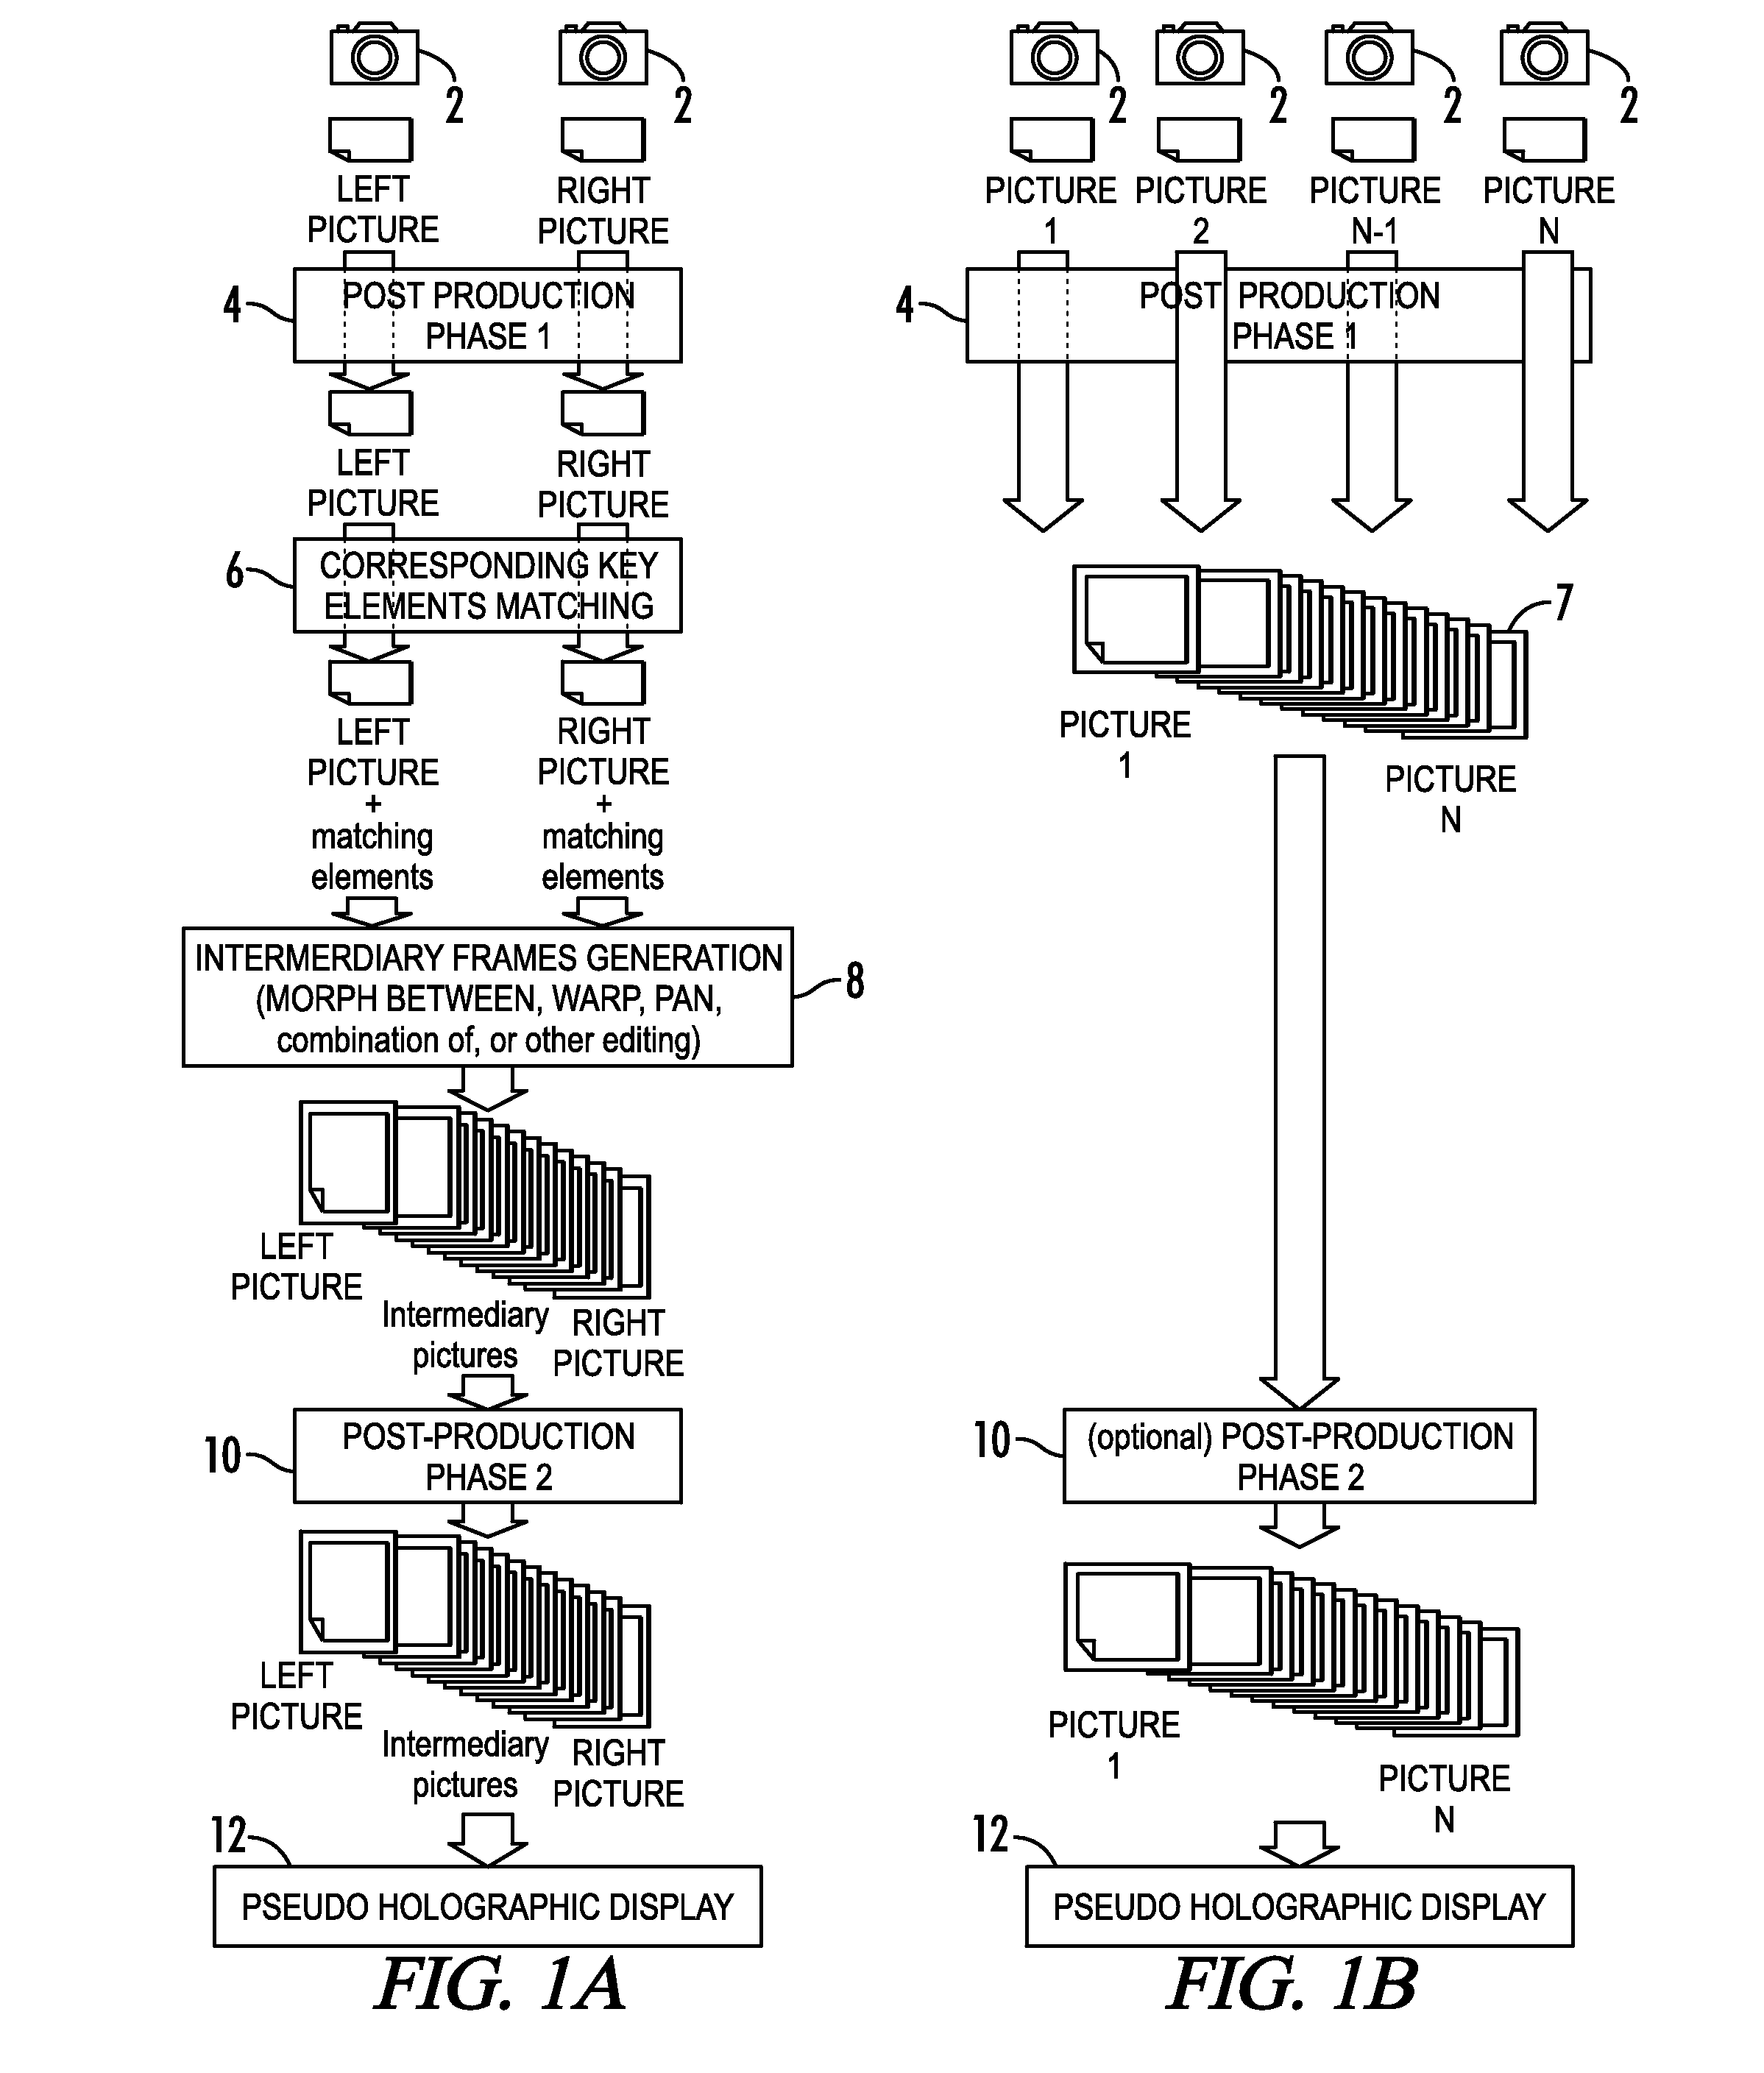 System and method for creating pseudo holographic displays on viewer position aware devices